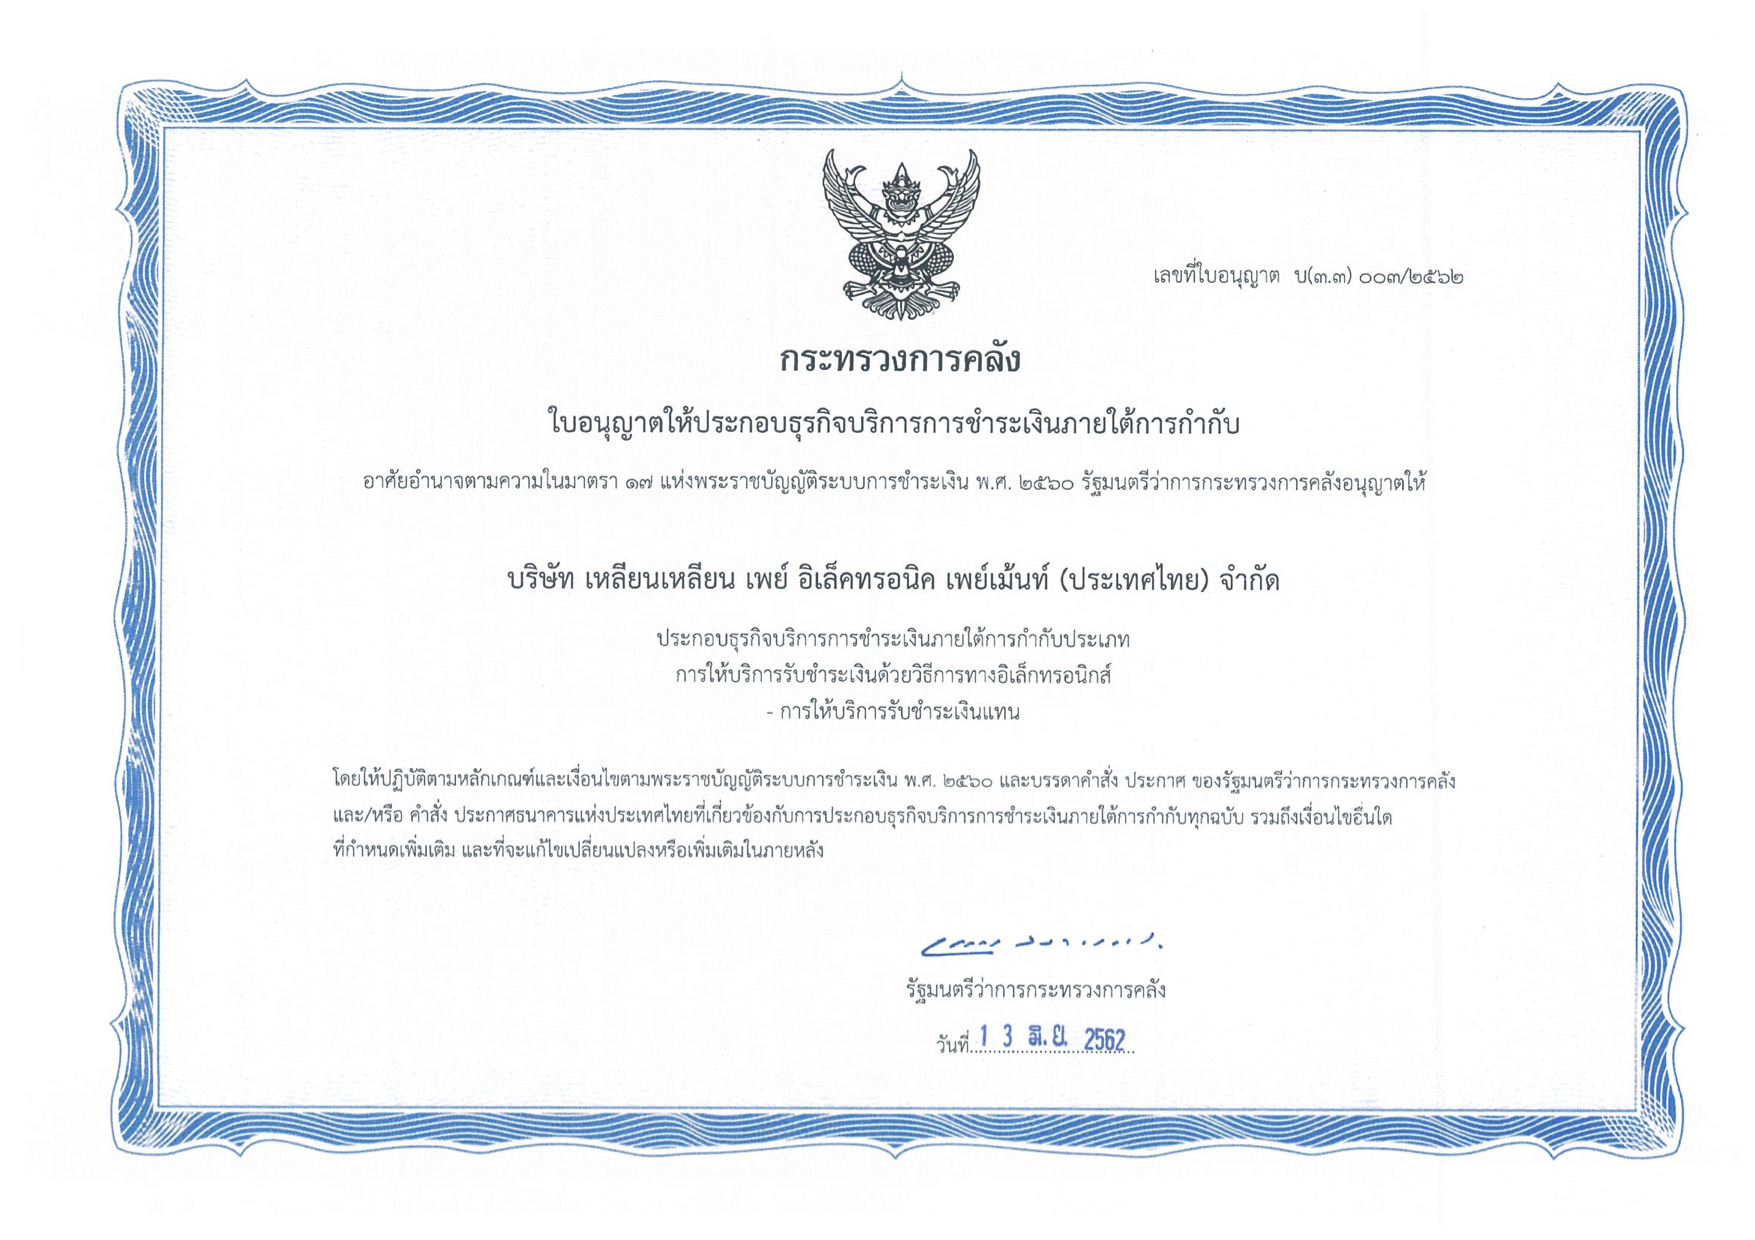 Thai Bank Card Payment Licence